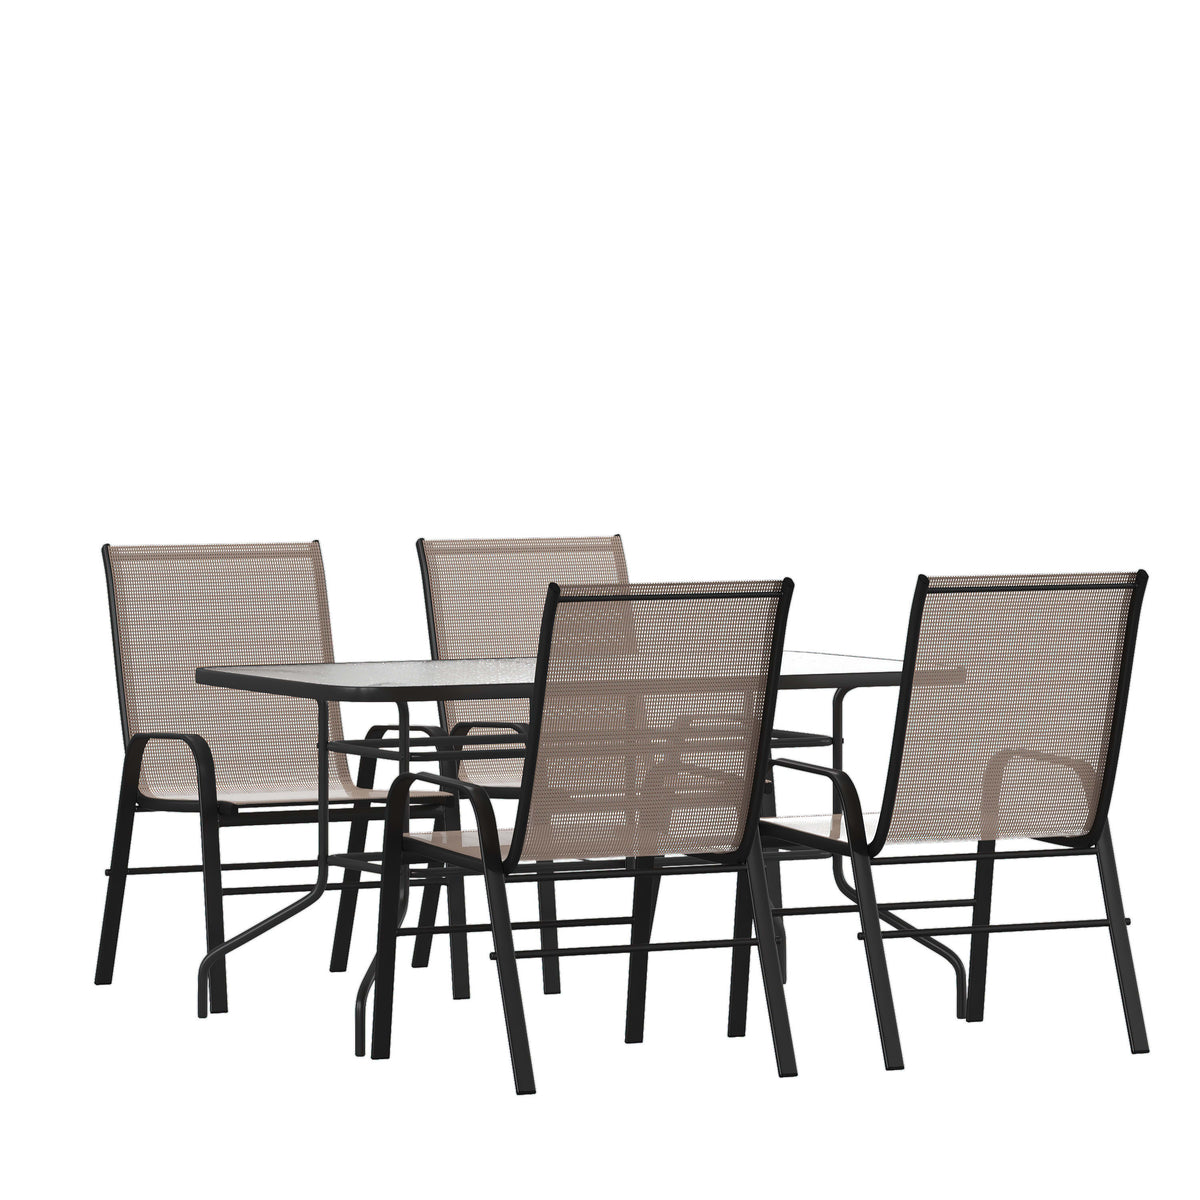 Brown |#| 5 Piece Patio Dining Set - 55inch Glass Patio Table, 4 Brown Flex Stack Chairs